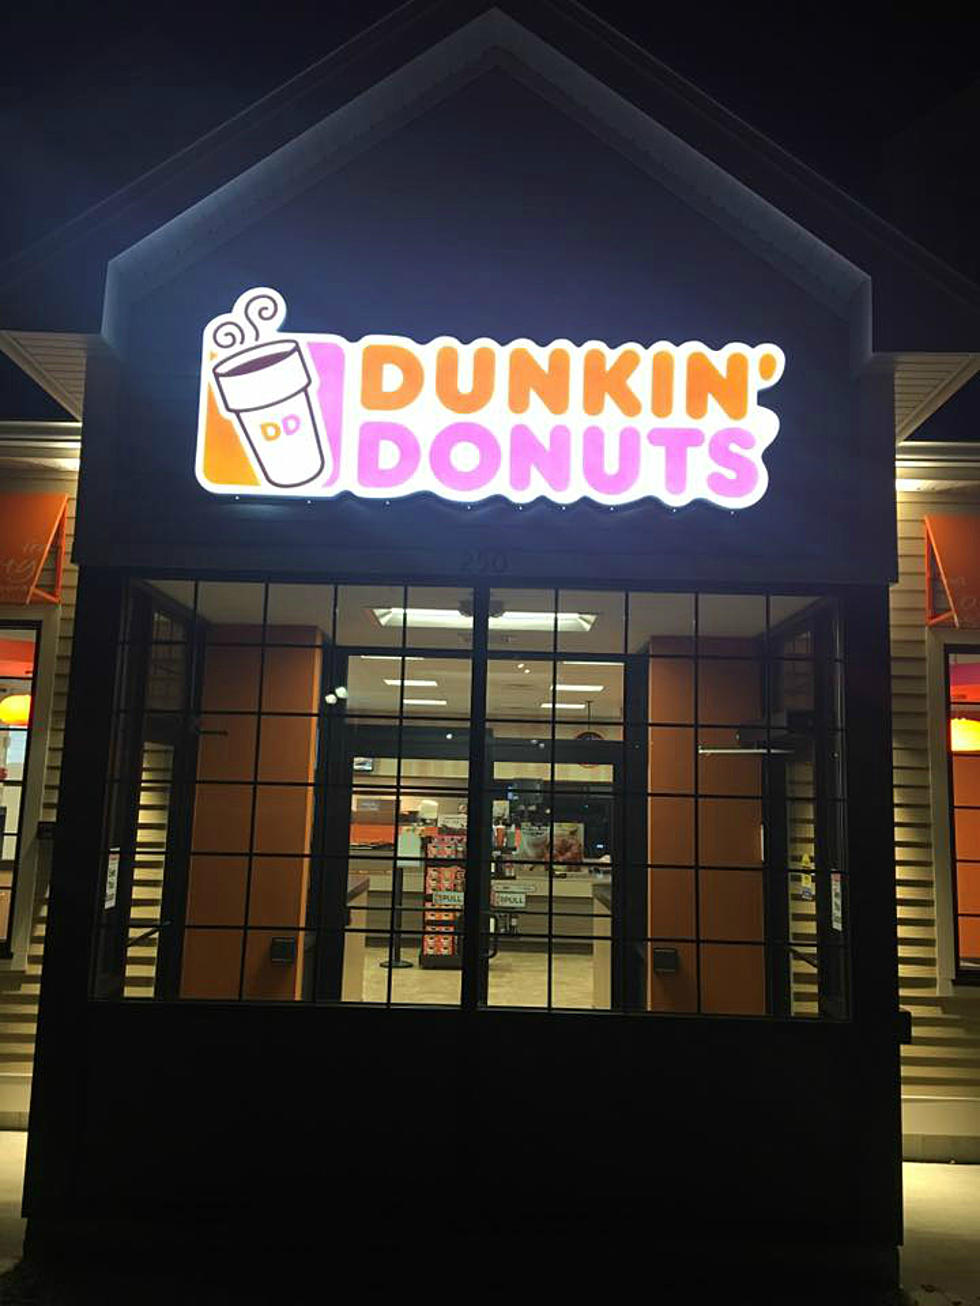 Dover Just Got a New Dunkin’ Donuts, and You Won’t Believe What It Looks Like Inside